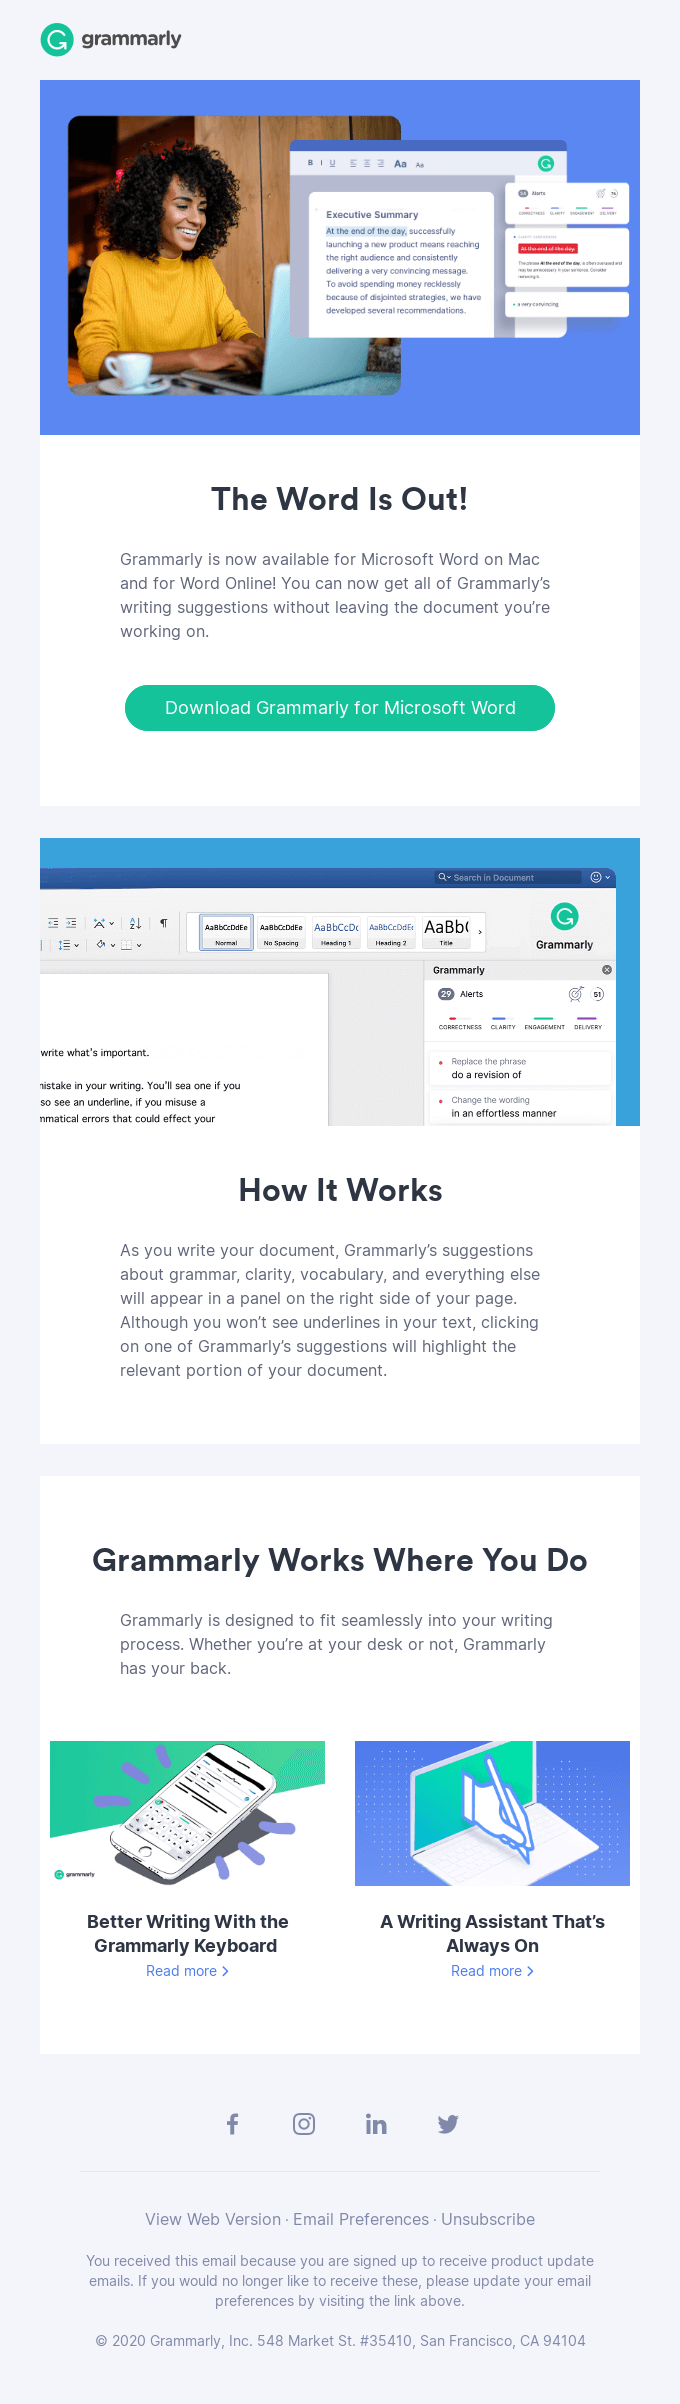 Grammarly for Microsoft Word is now available!